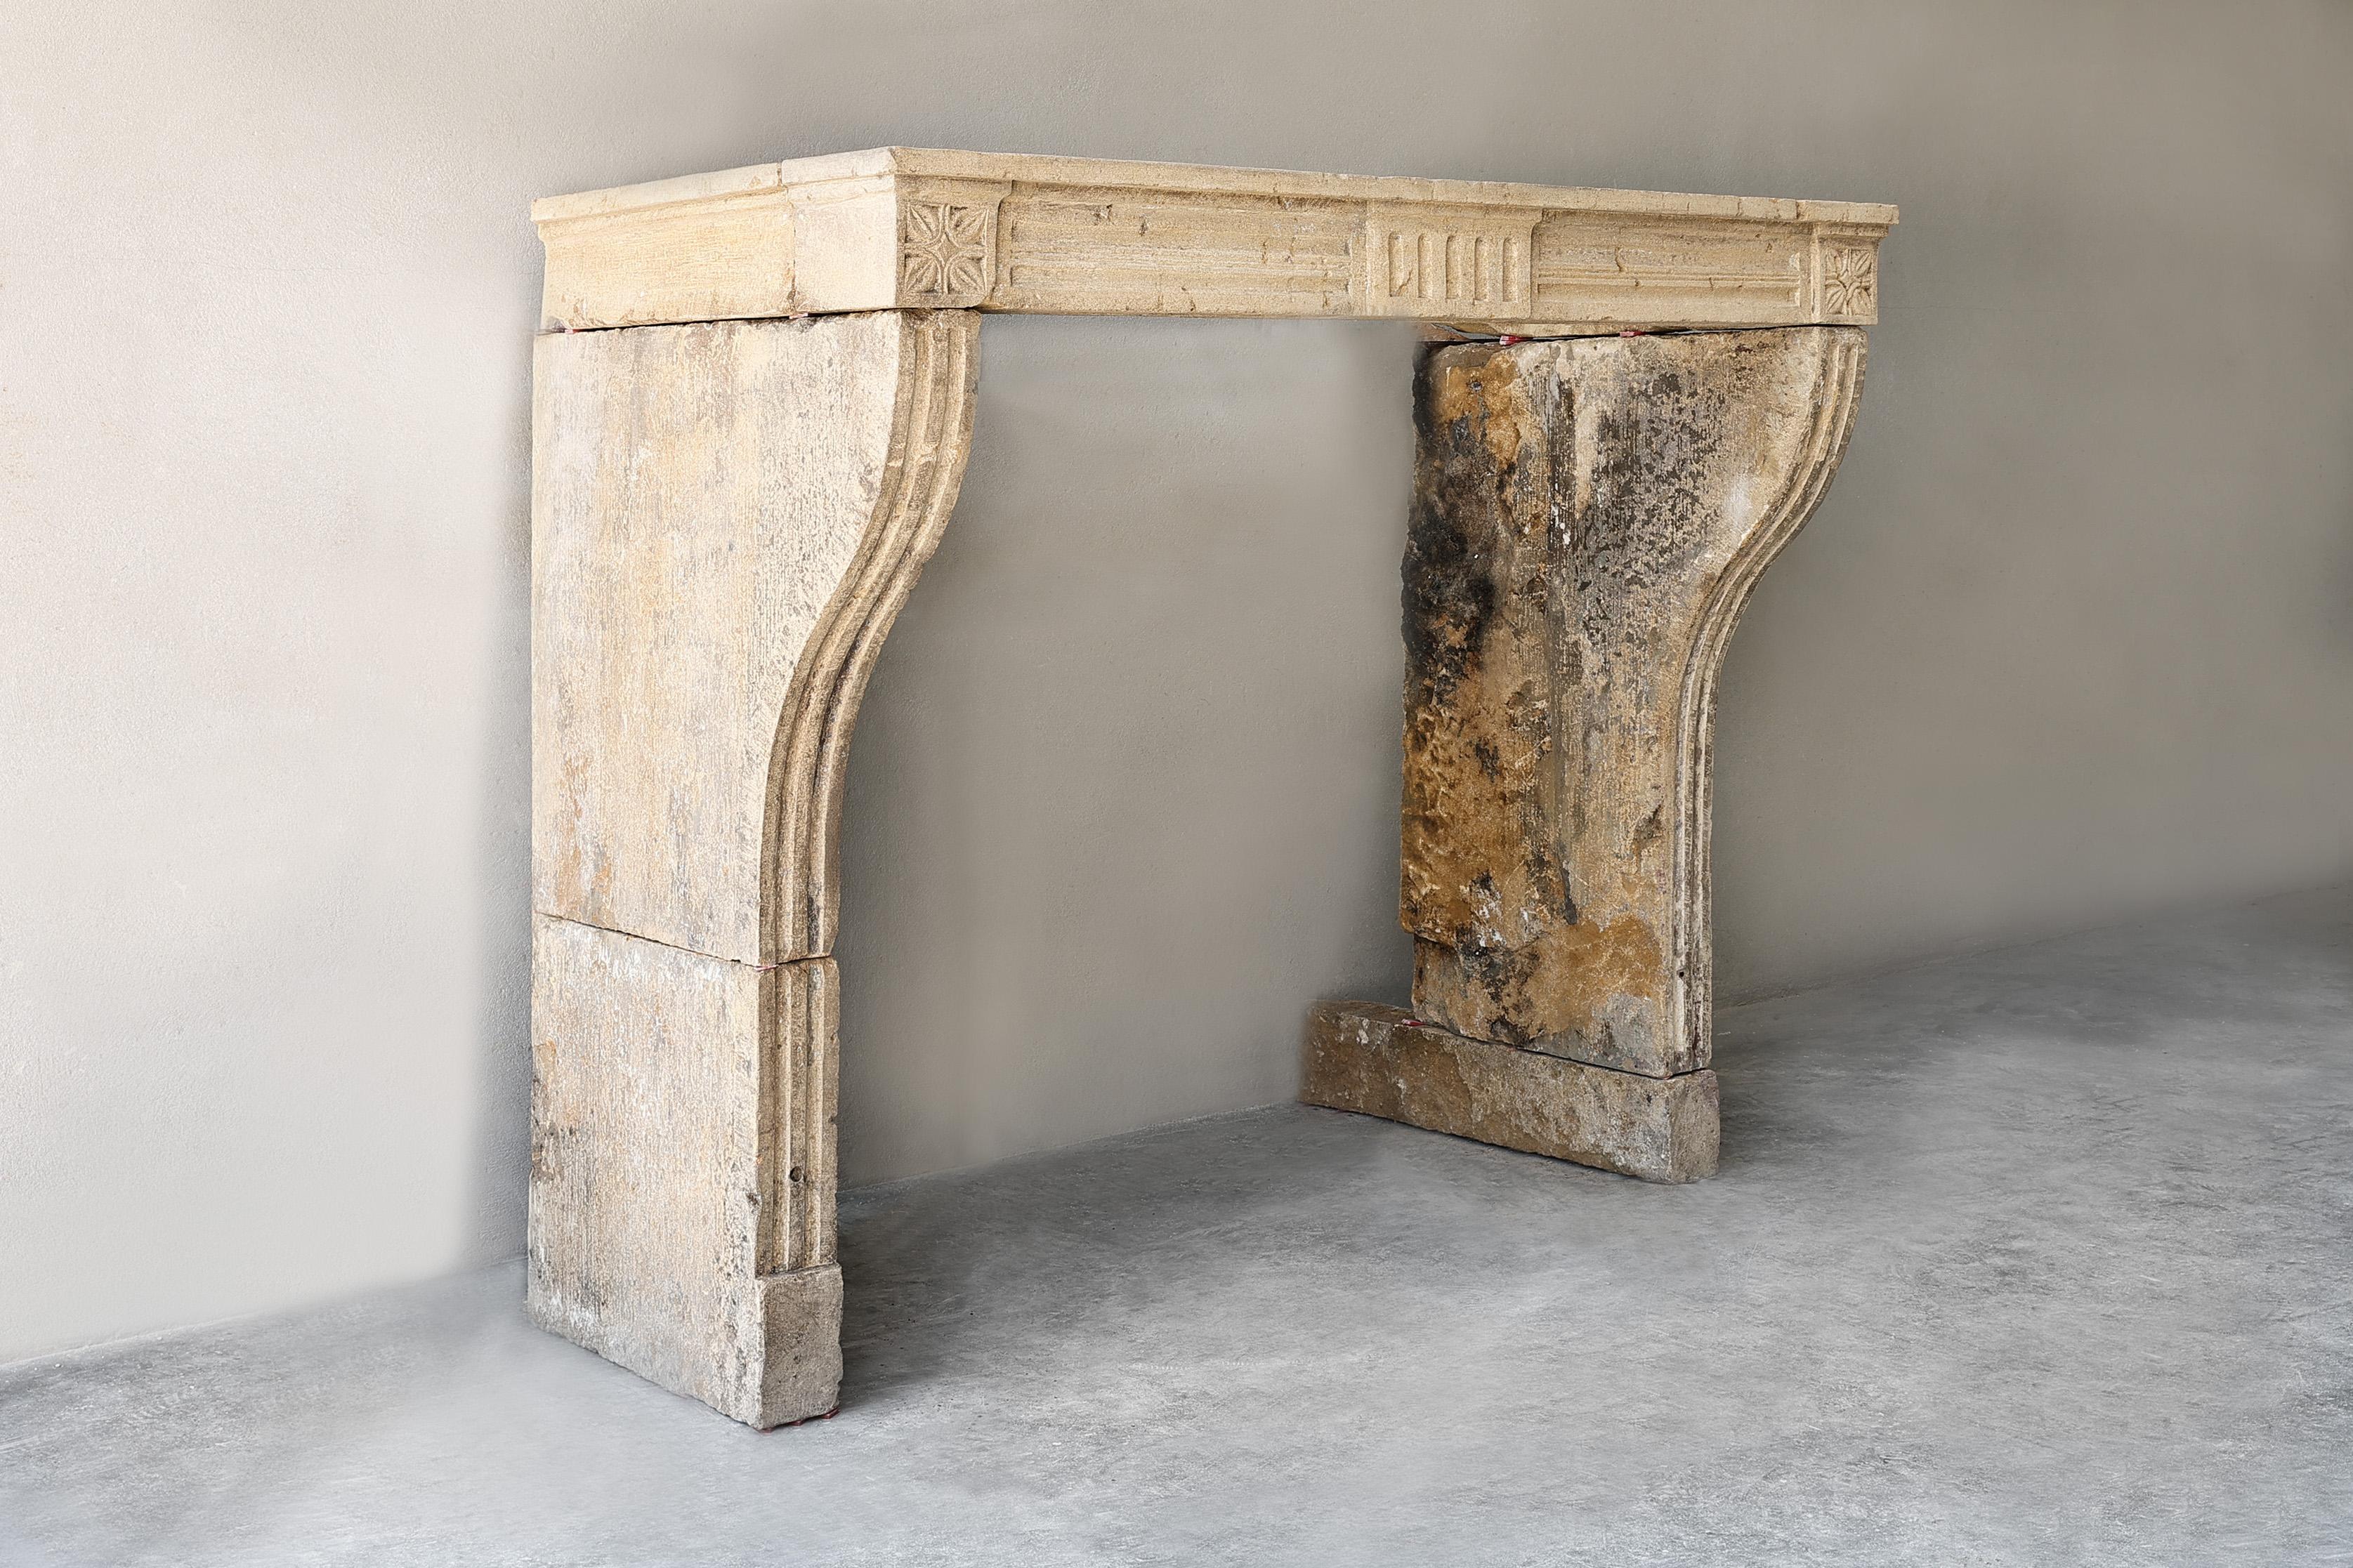 Antique French limestone fireplace from the 19th century! A rustic, slender fireplace with few ornaments, but with beautiful lines. The front part is provided with flutes that also continue on the legs. The legs are slightly curved and the warm